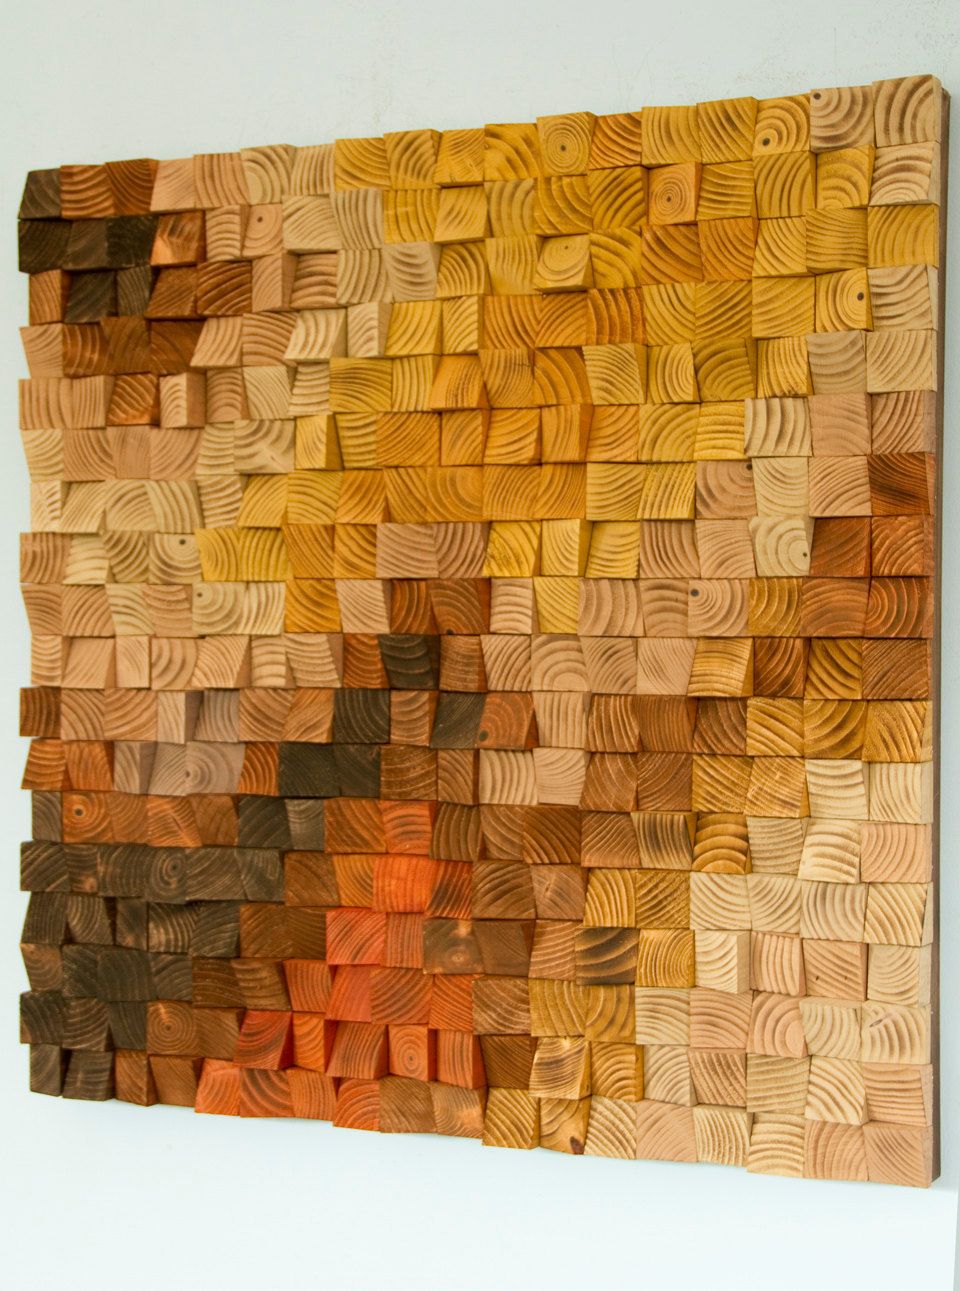 Large Rustic Wood Wall Art, Wood Wall Sculpture, Abstract Within Most Popular Abstract Wood Wall Art (View 12 of 20)